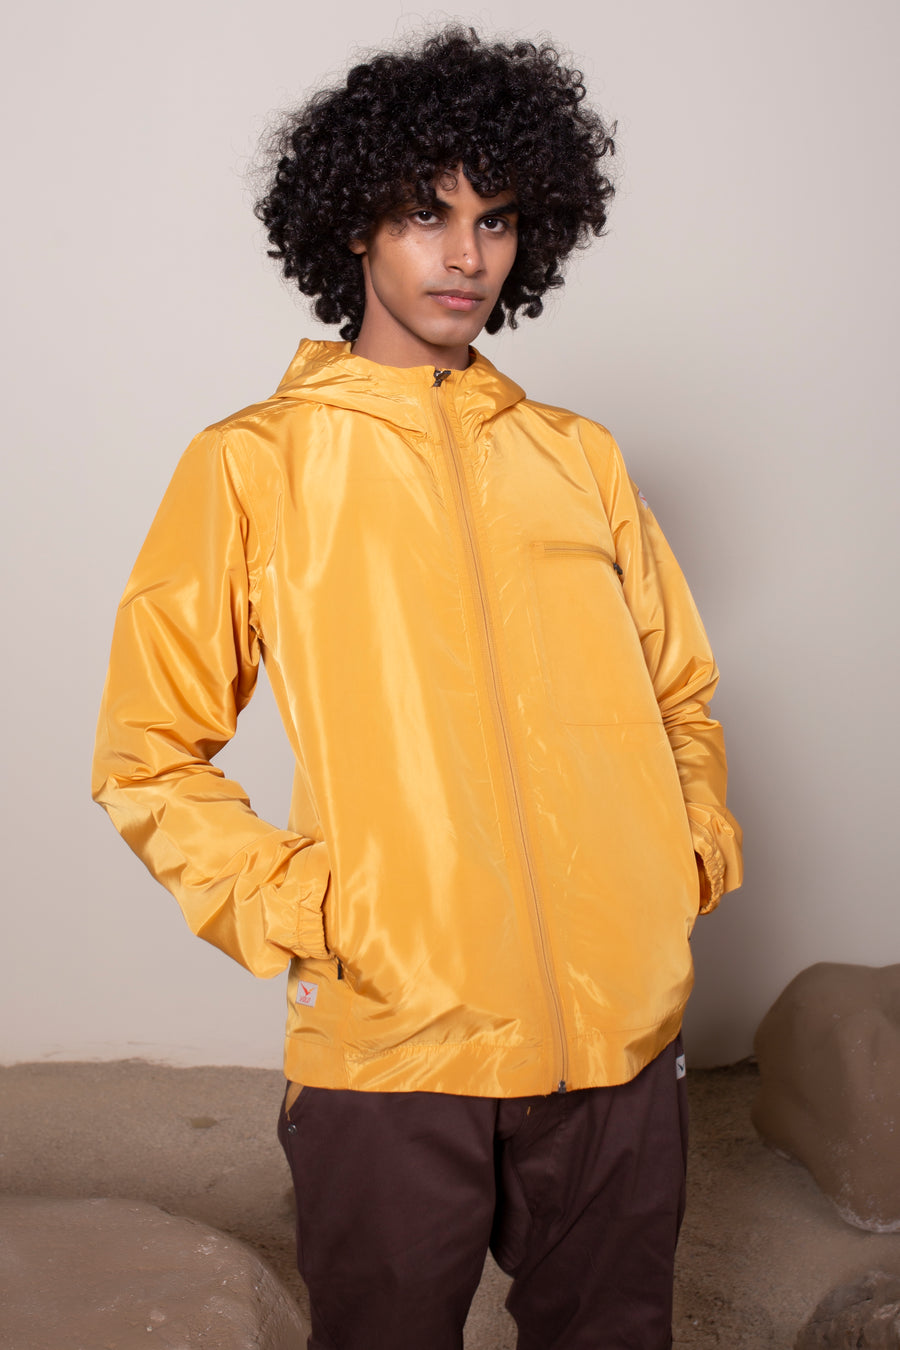 Men's Windansea Jacket in Golden | VOLO Apparel | The ultimate all year jacket, an ultralight hooded windbreaker, crafted with the revolutionary memory fabric and five pockets. This jacket is full of features, water repellant, three zipper pockets, UPF 50 protection from the sun and tailored fit to look super stylish while being ready for any adventure.